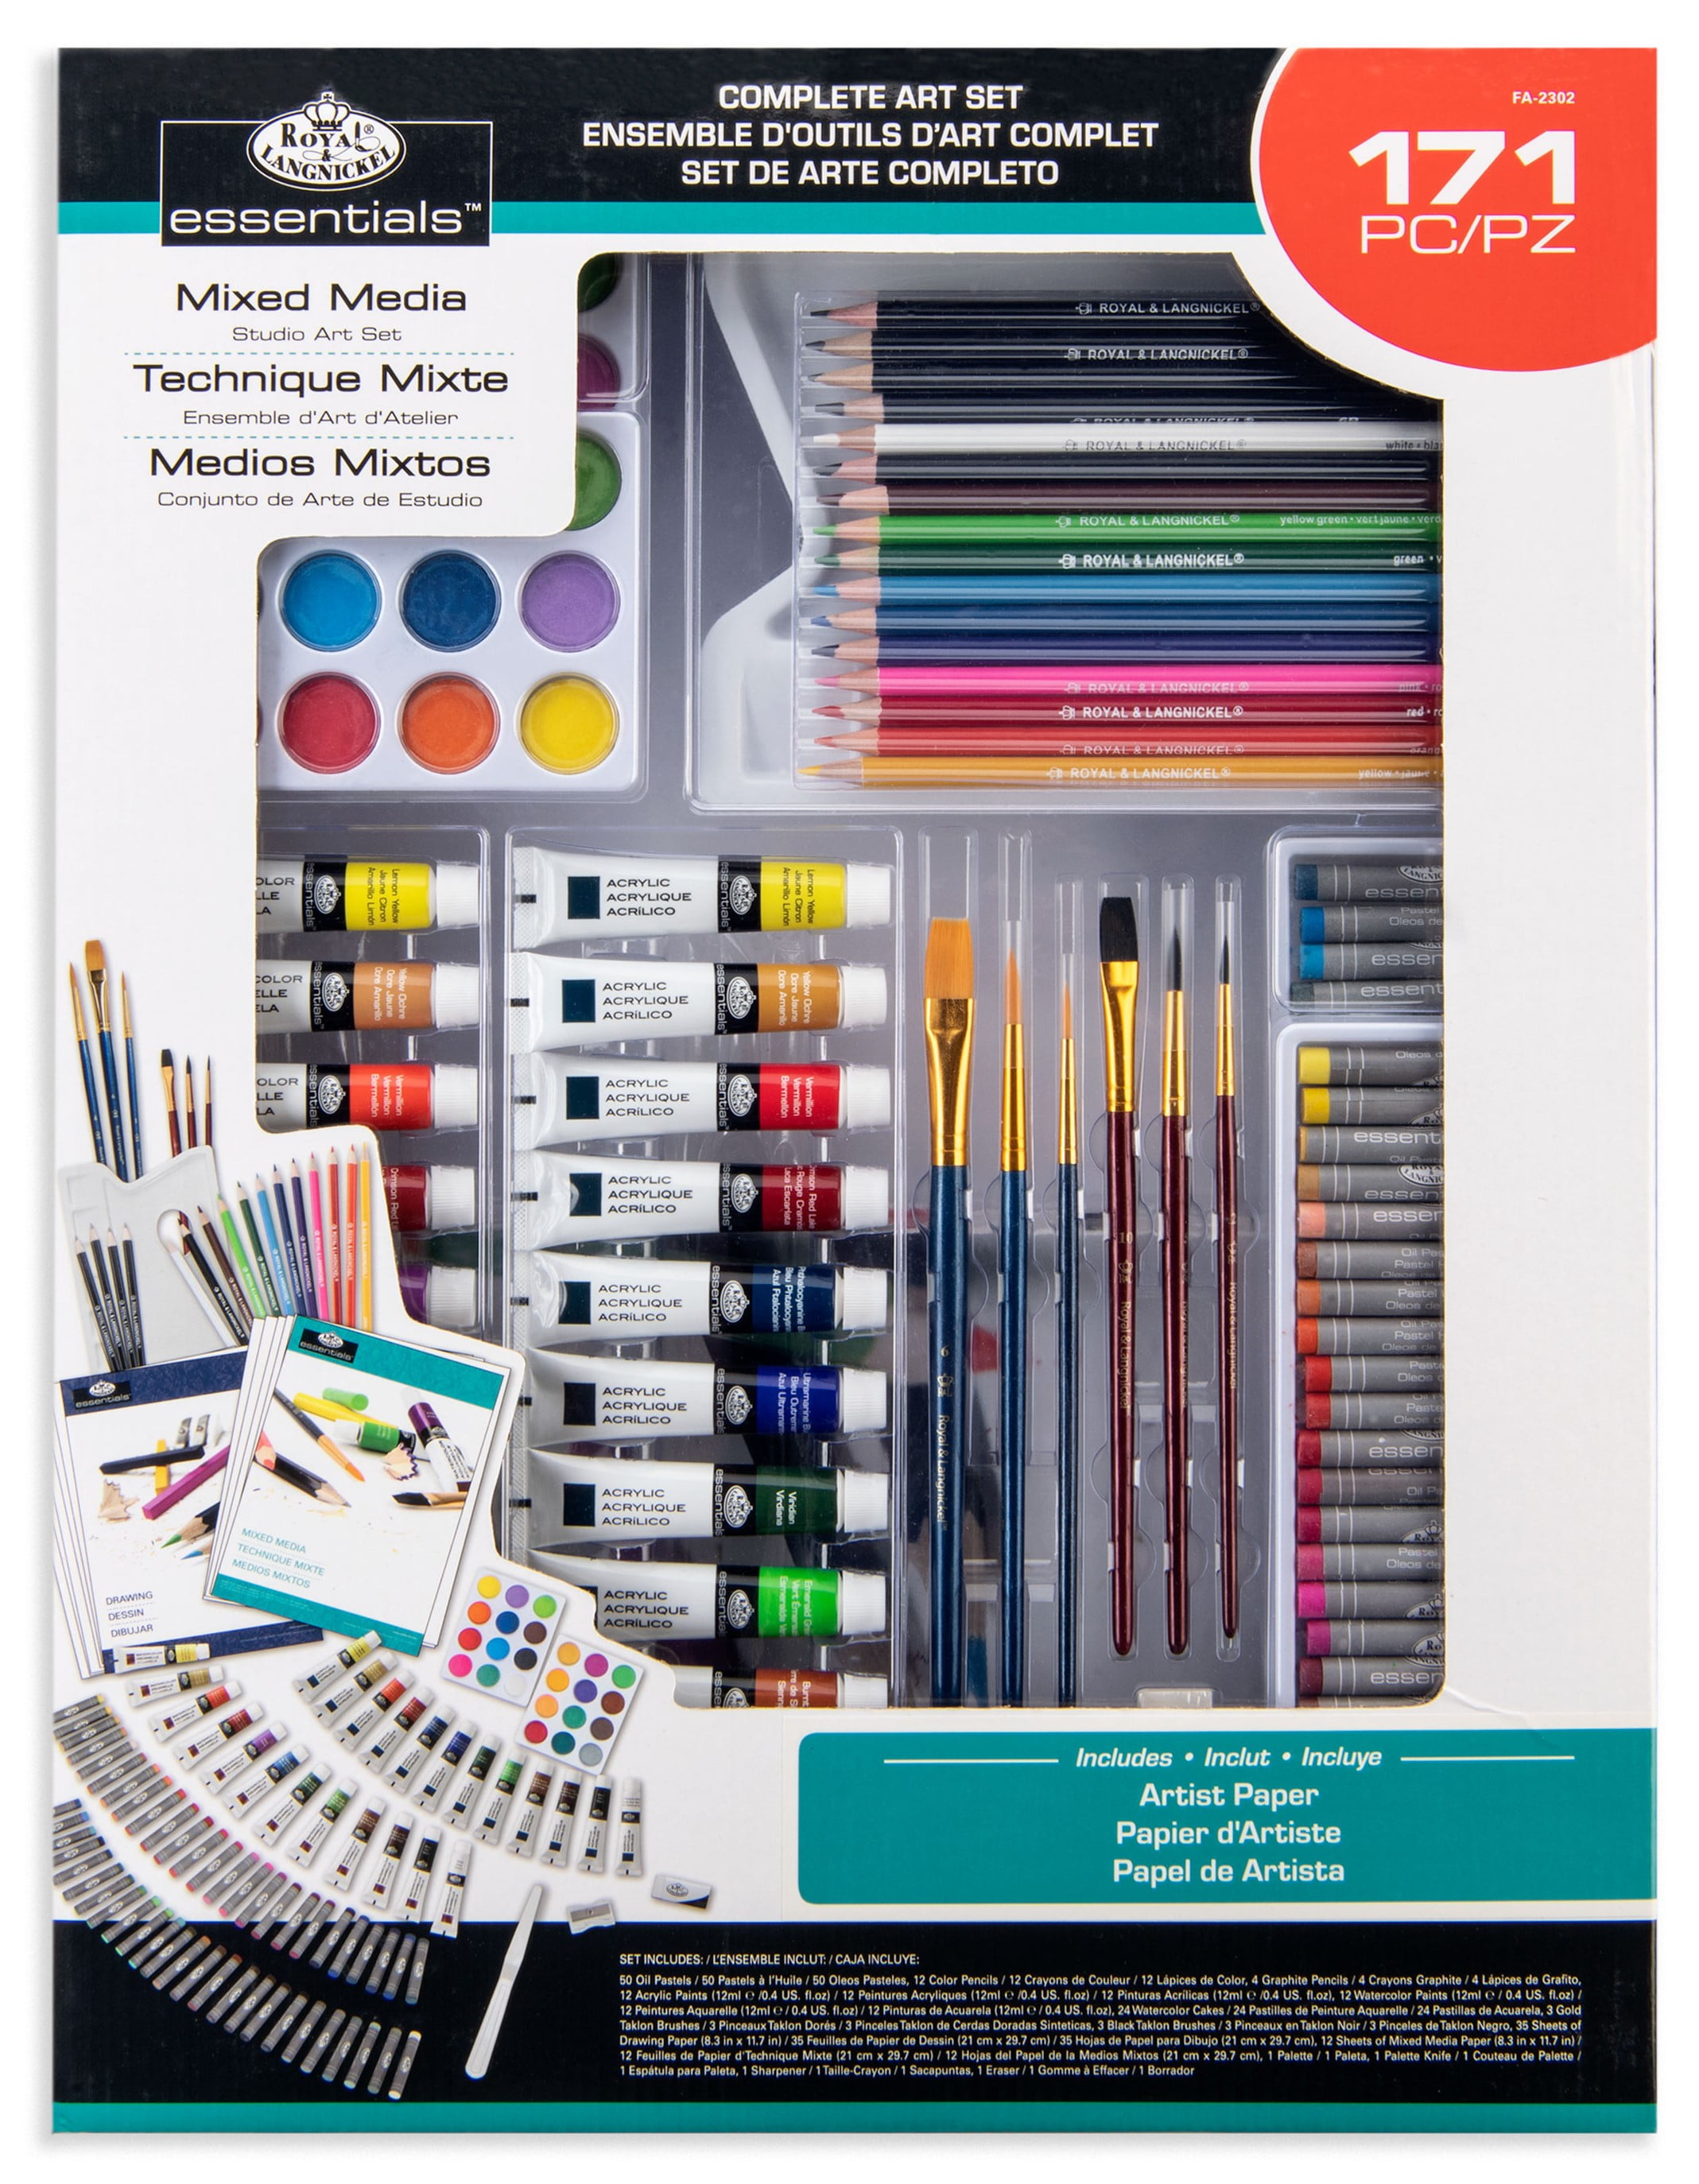 Water Color Set Paint, Oval Pan w/Brush, 8 Assorted Colors, 1 Set -  CHL40508